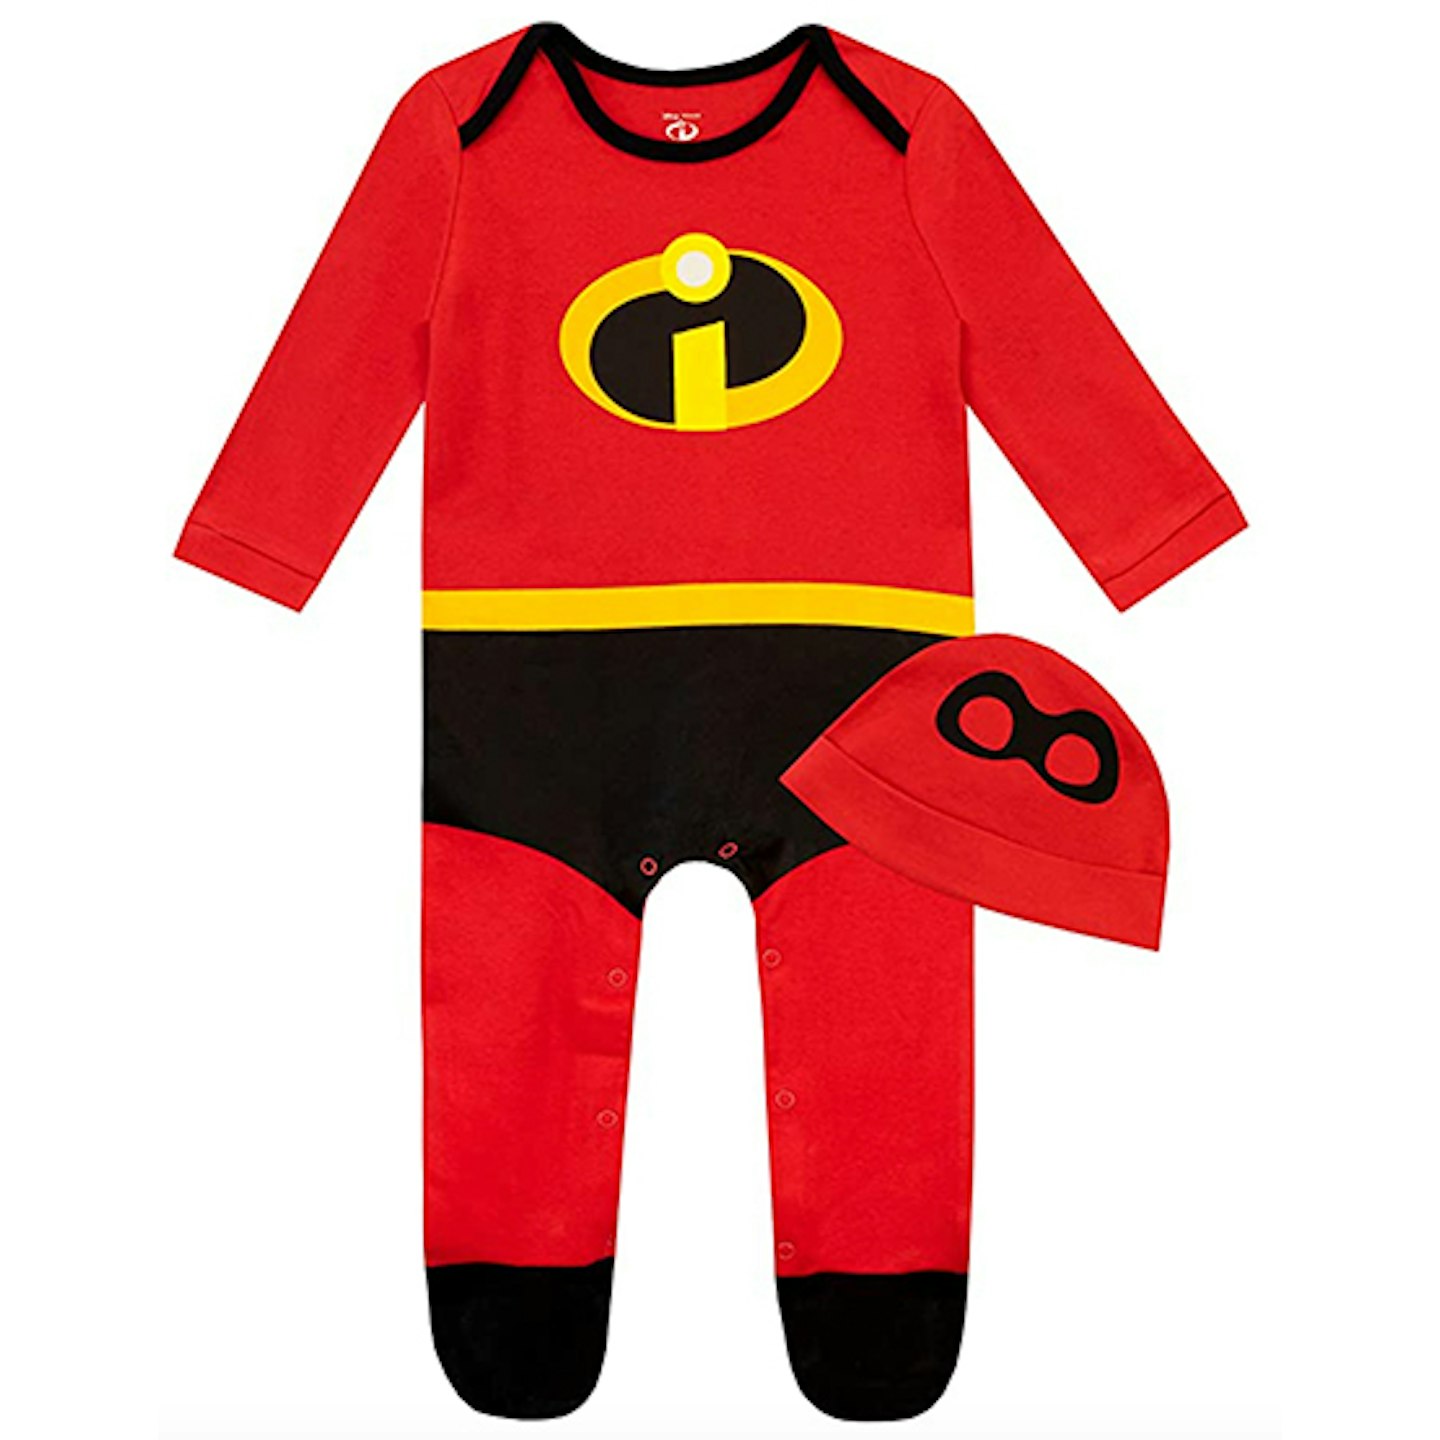 Disney Baby Boys Sleepsuit and Hat Set The Incredibles